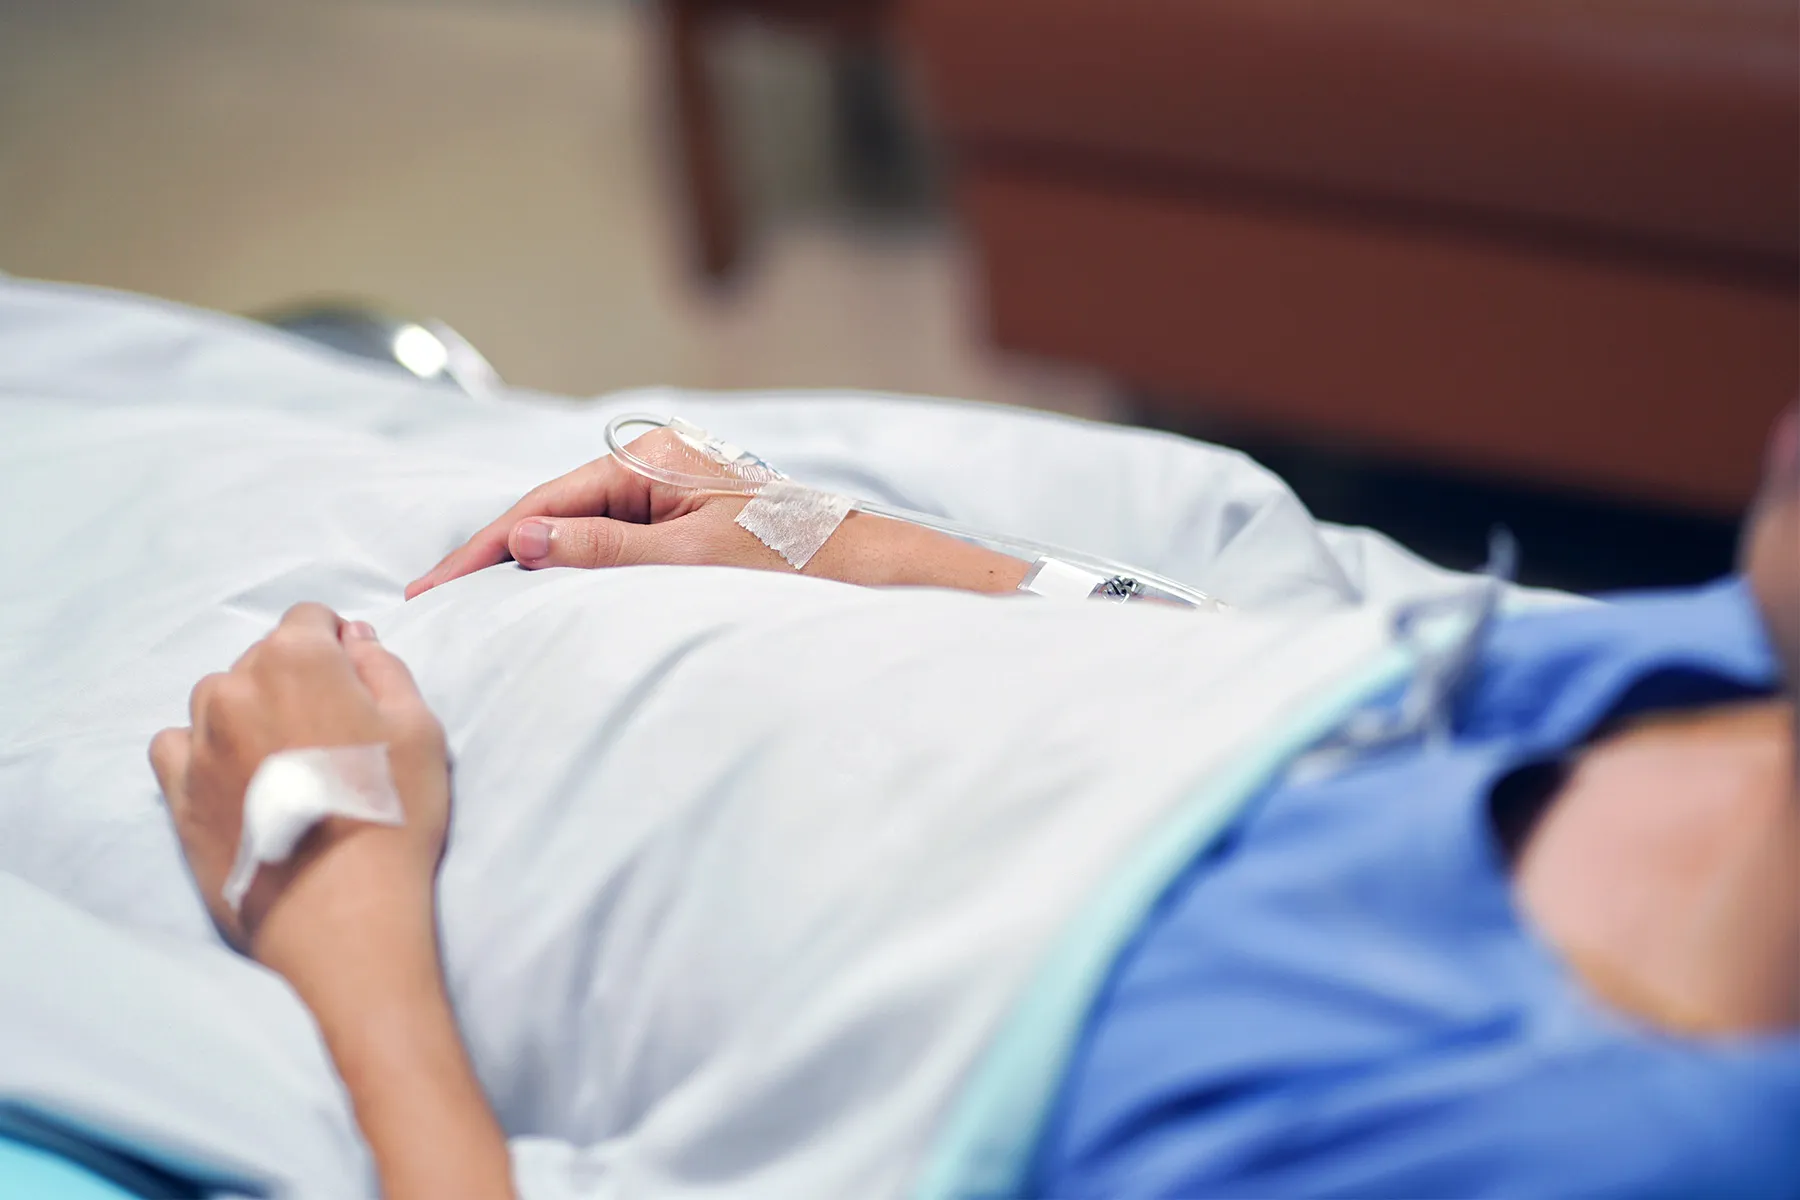 Why Patients on Ventilators May Take Weeks to Regain Consciousness